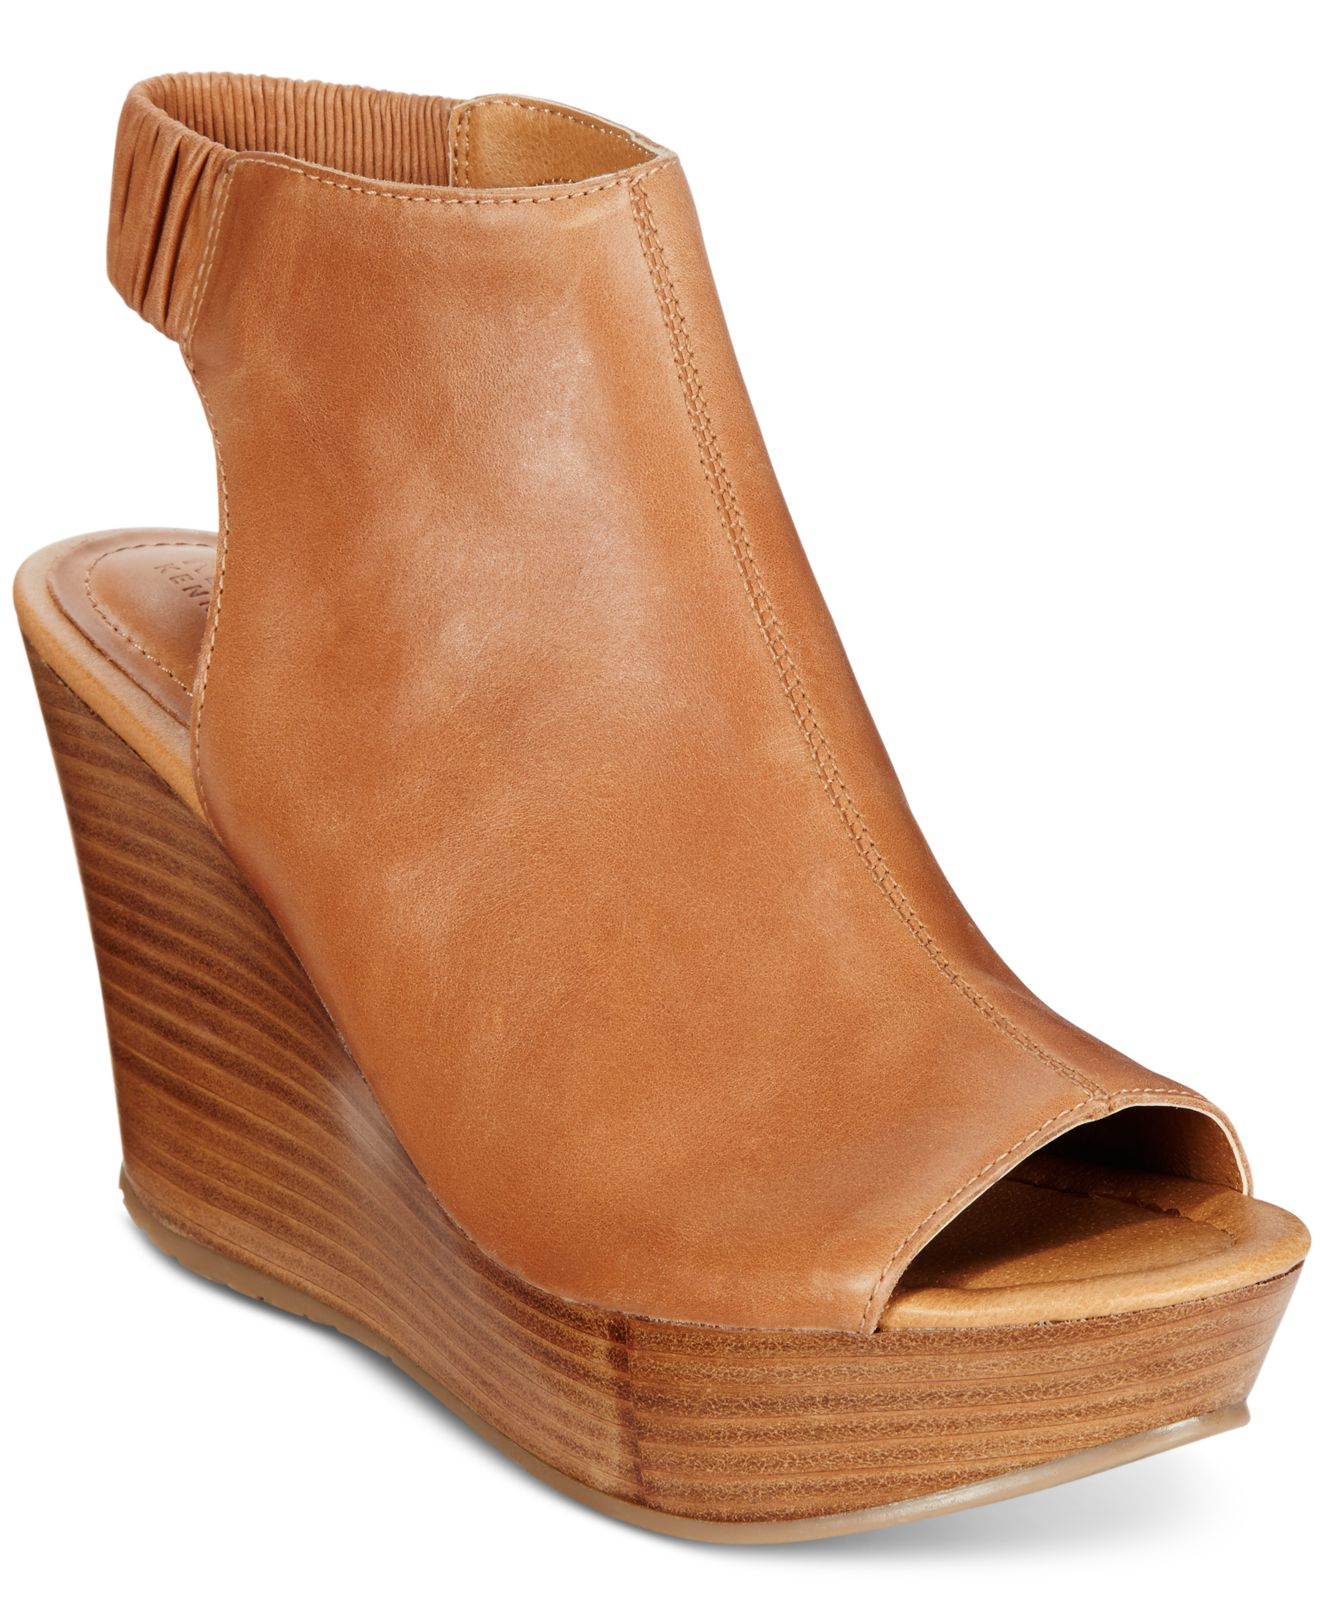 Kenneth Cole Reaction Leather Sole Chick Platform Wedge Sandals in  Butterscotch (Brown) - Lyst